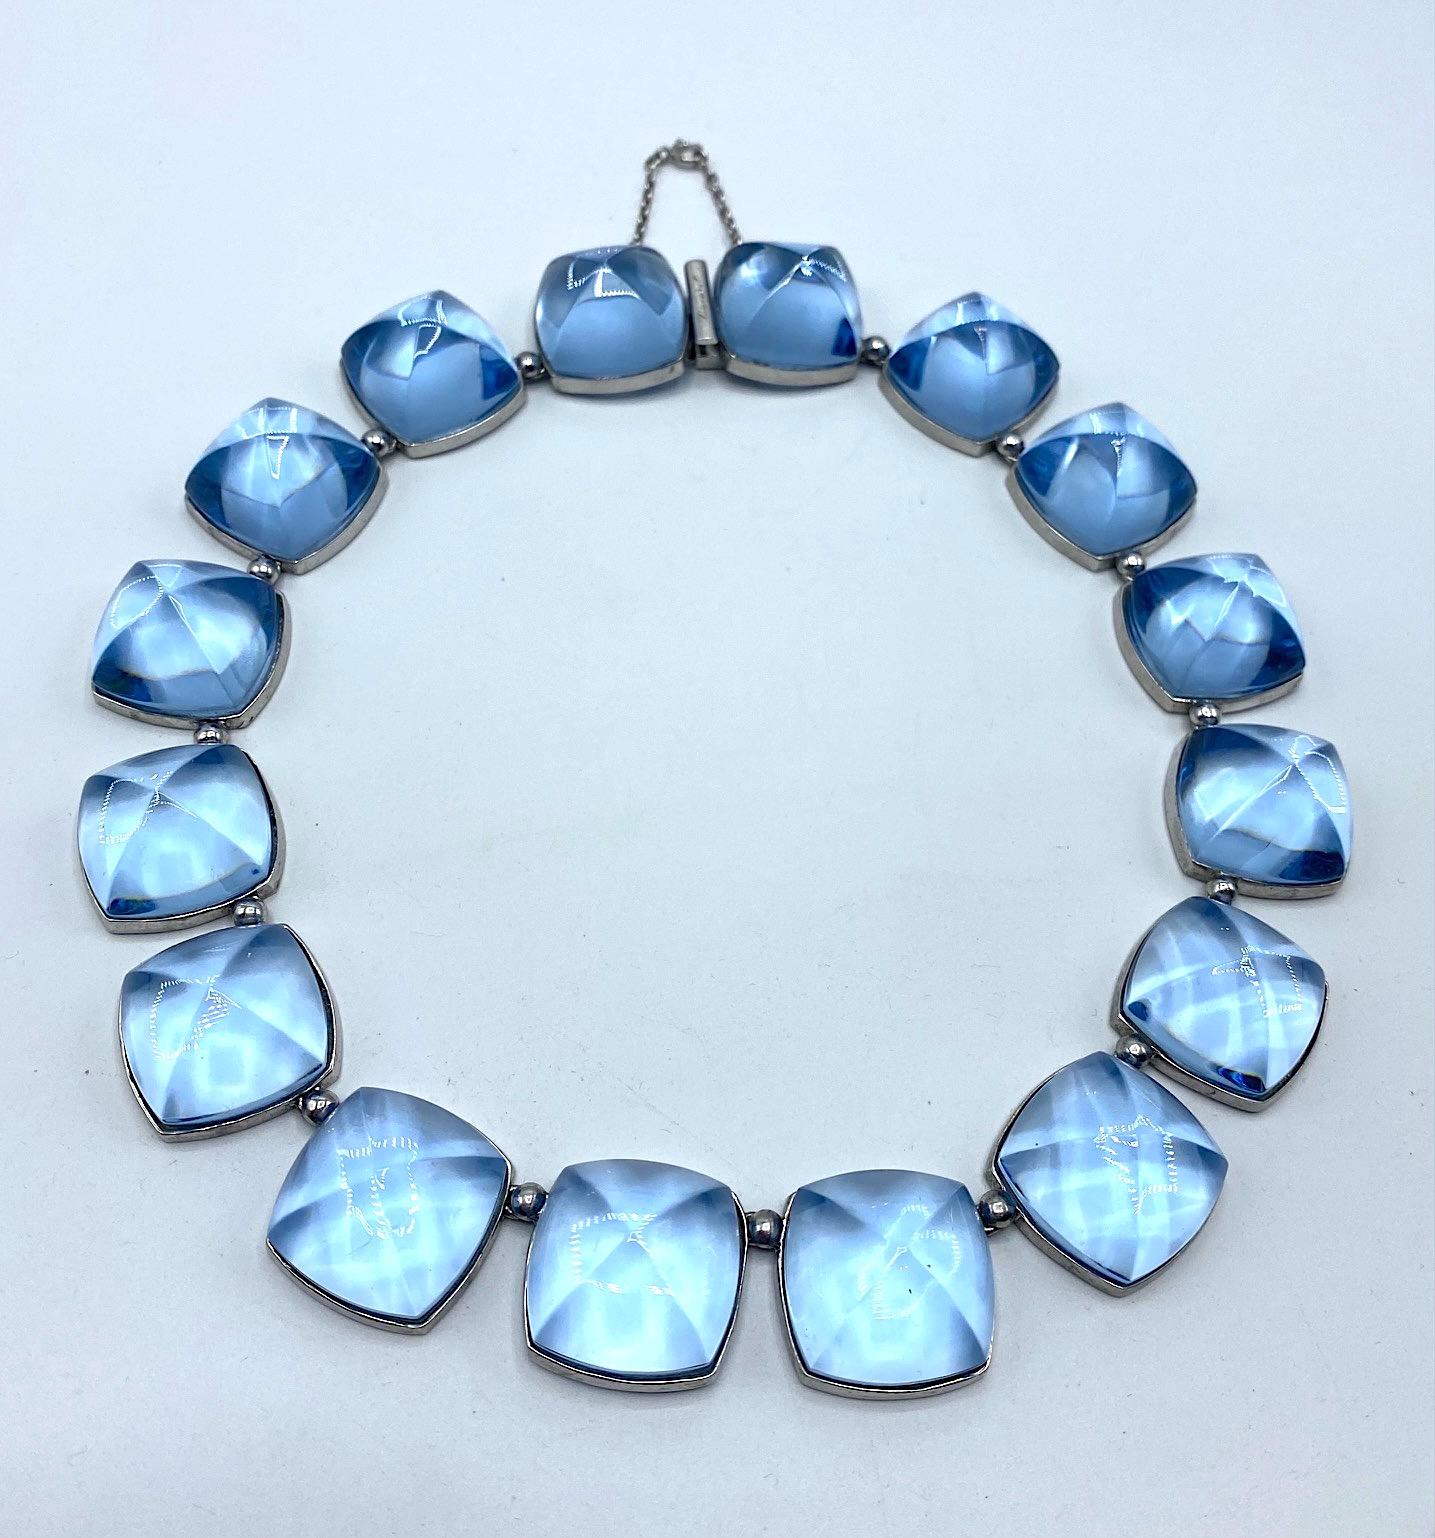 Presented is a stunning light sky blue crystal and sterling silver necklace by French glass house Baccarat. The necklace is comprised of 15 links of measuring 1 inch square separated by a small bead link. Each glass link is has a large .94 of an